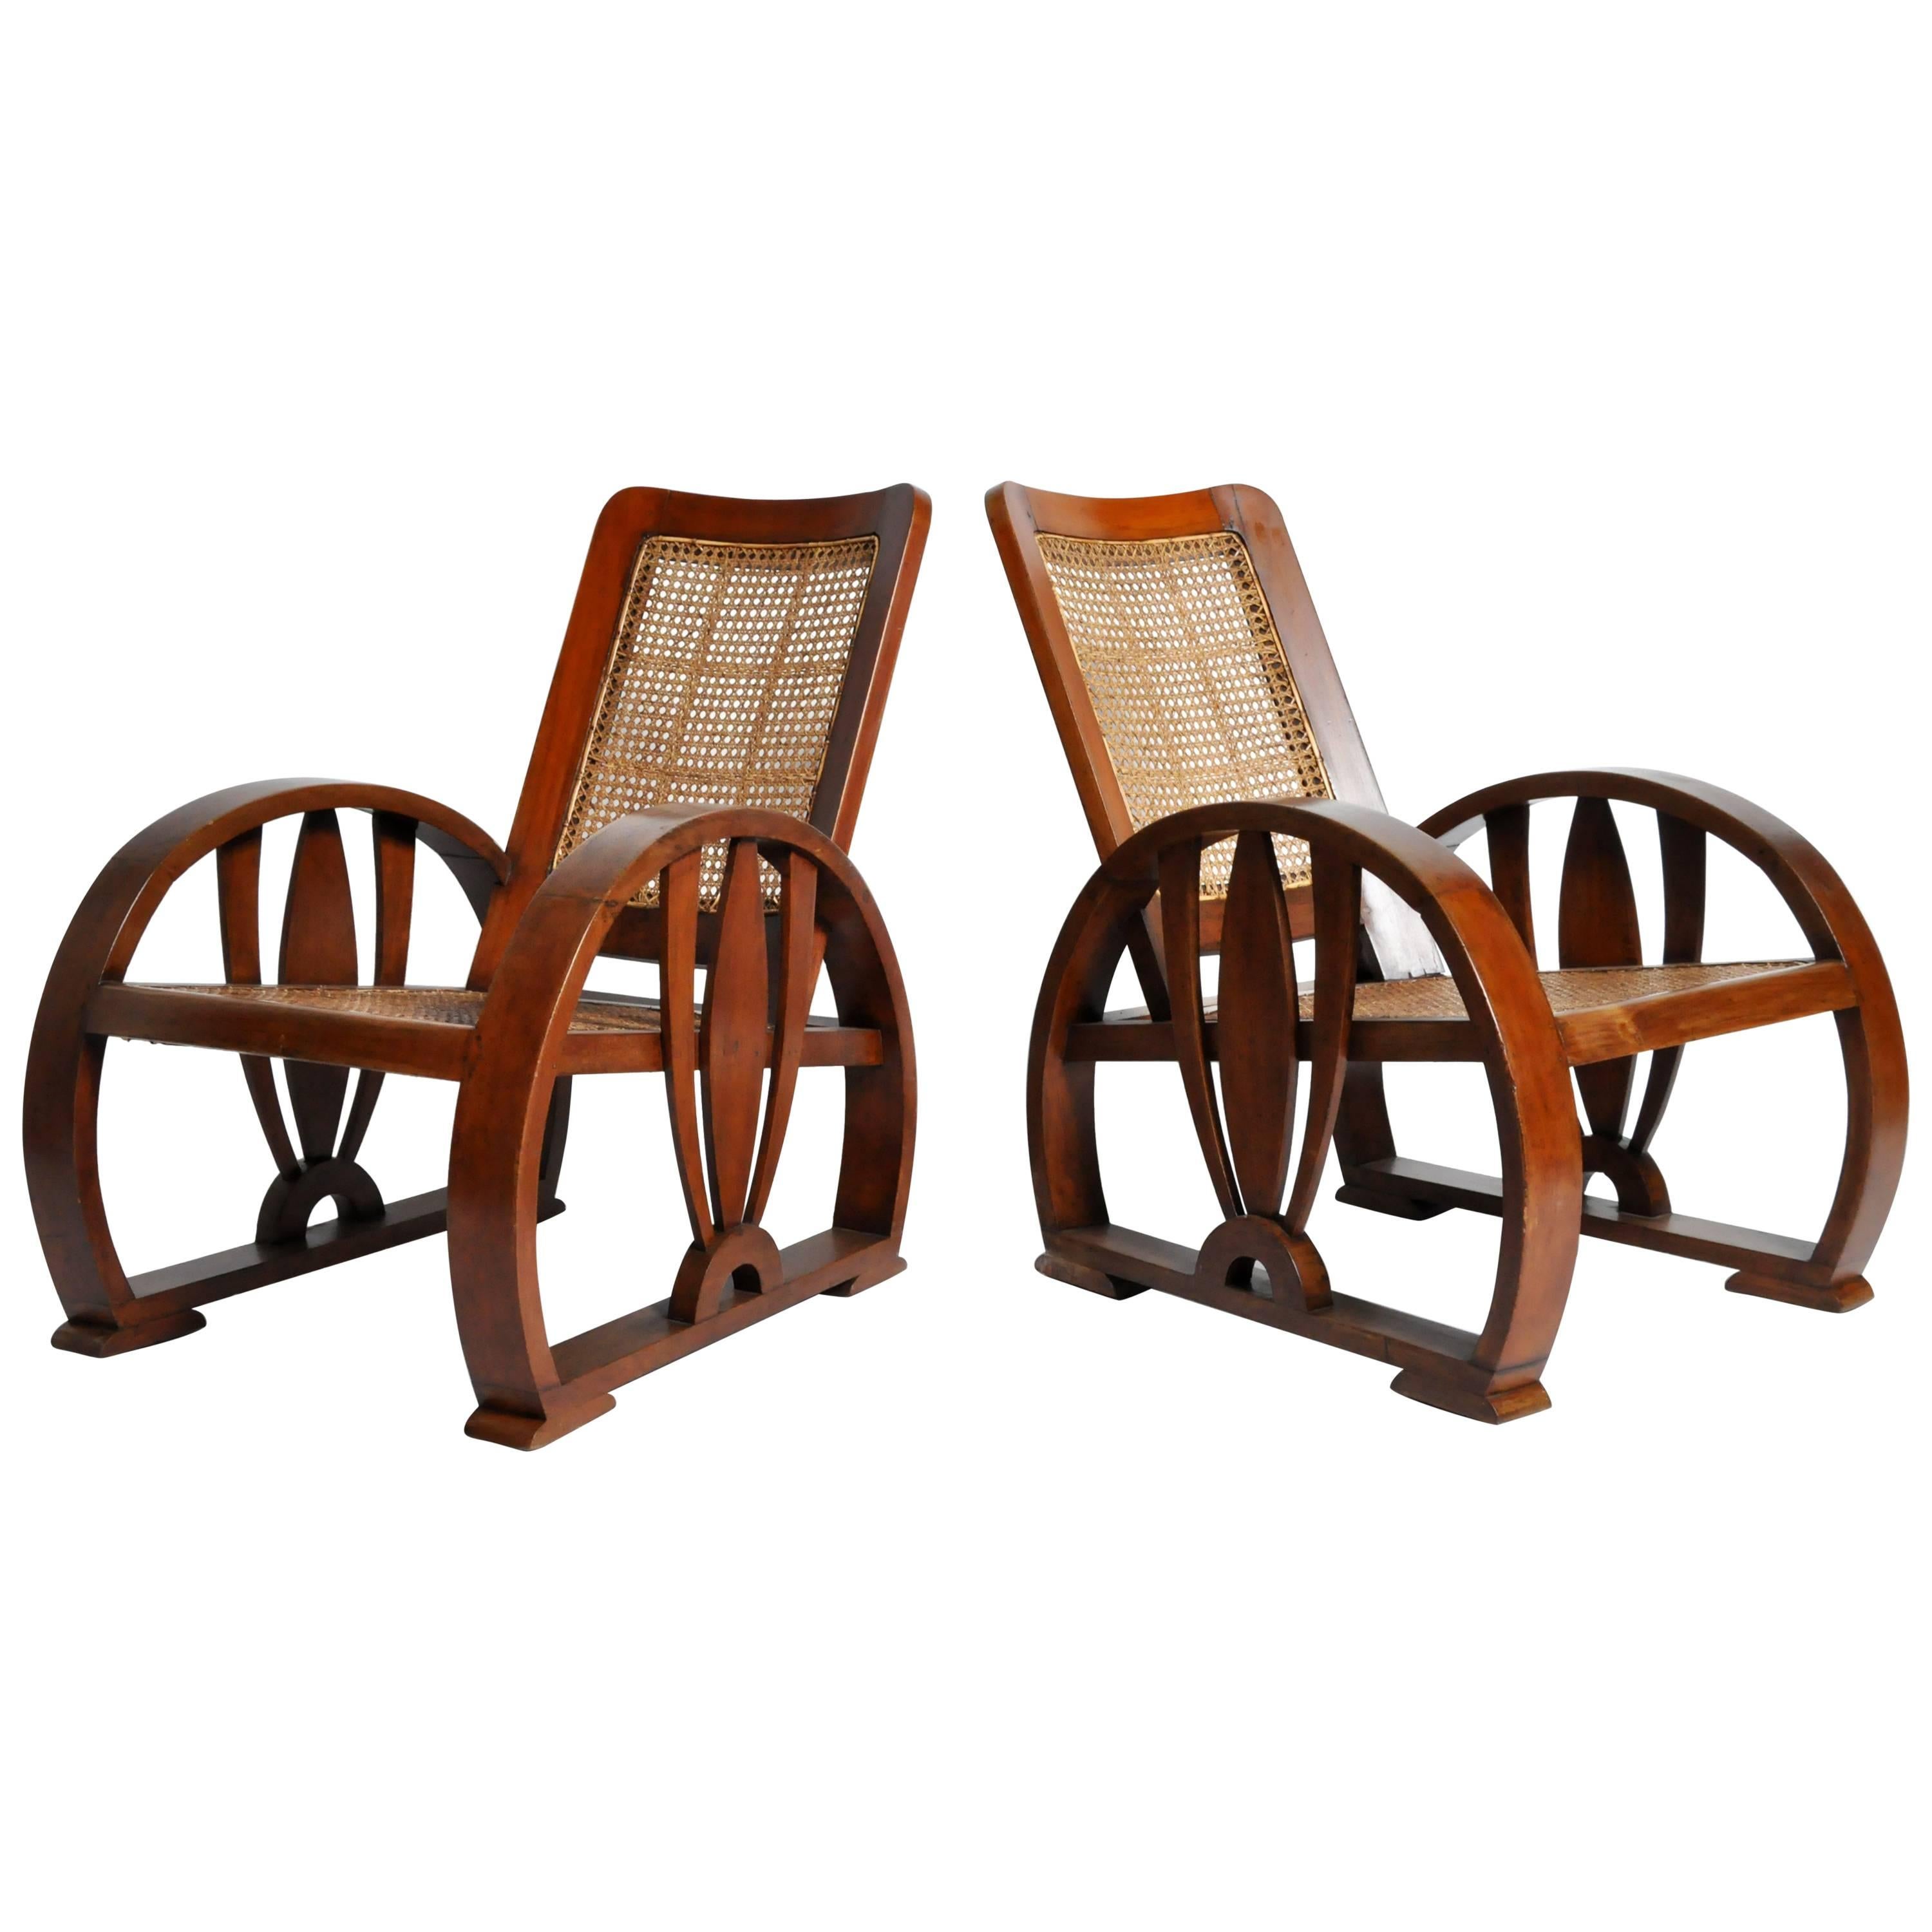 Pair of British Colonial Art Deco Rattan Chairs